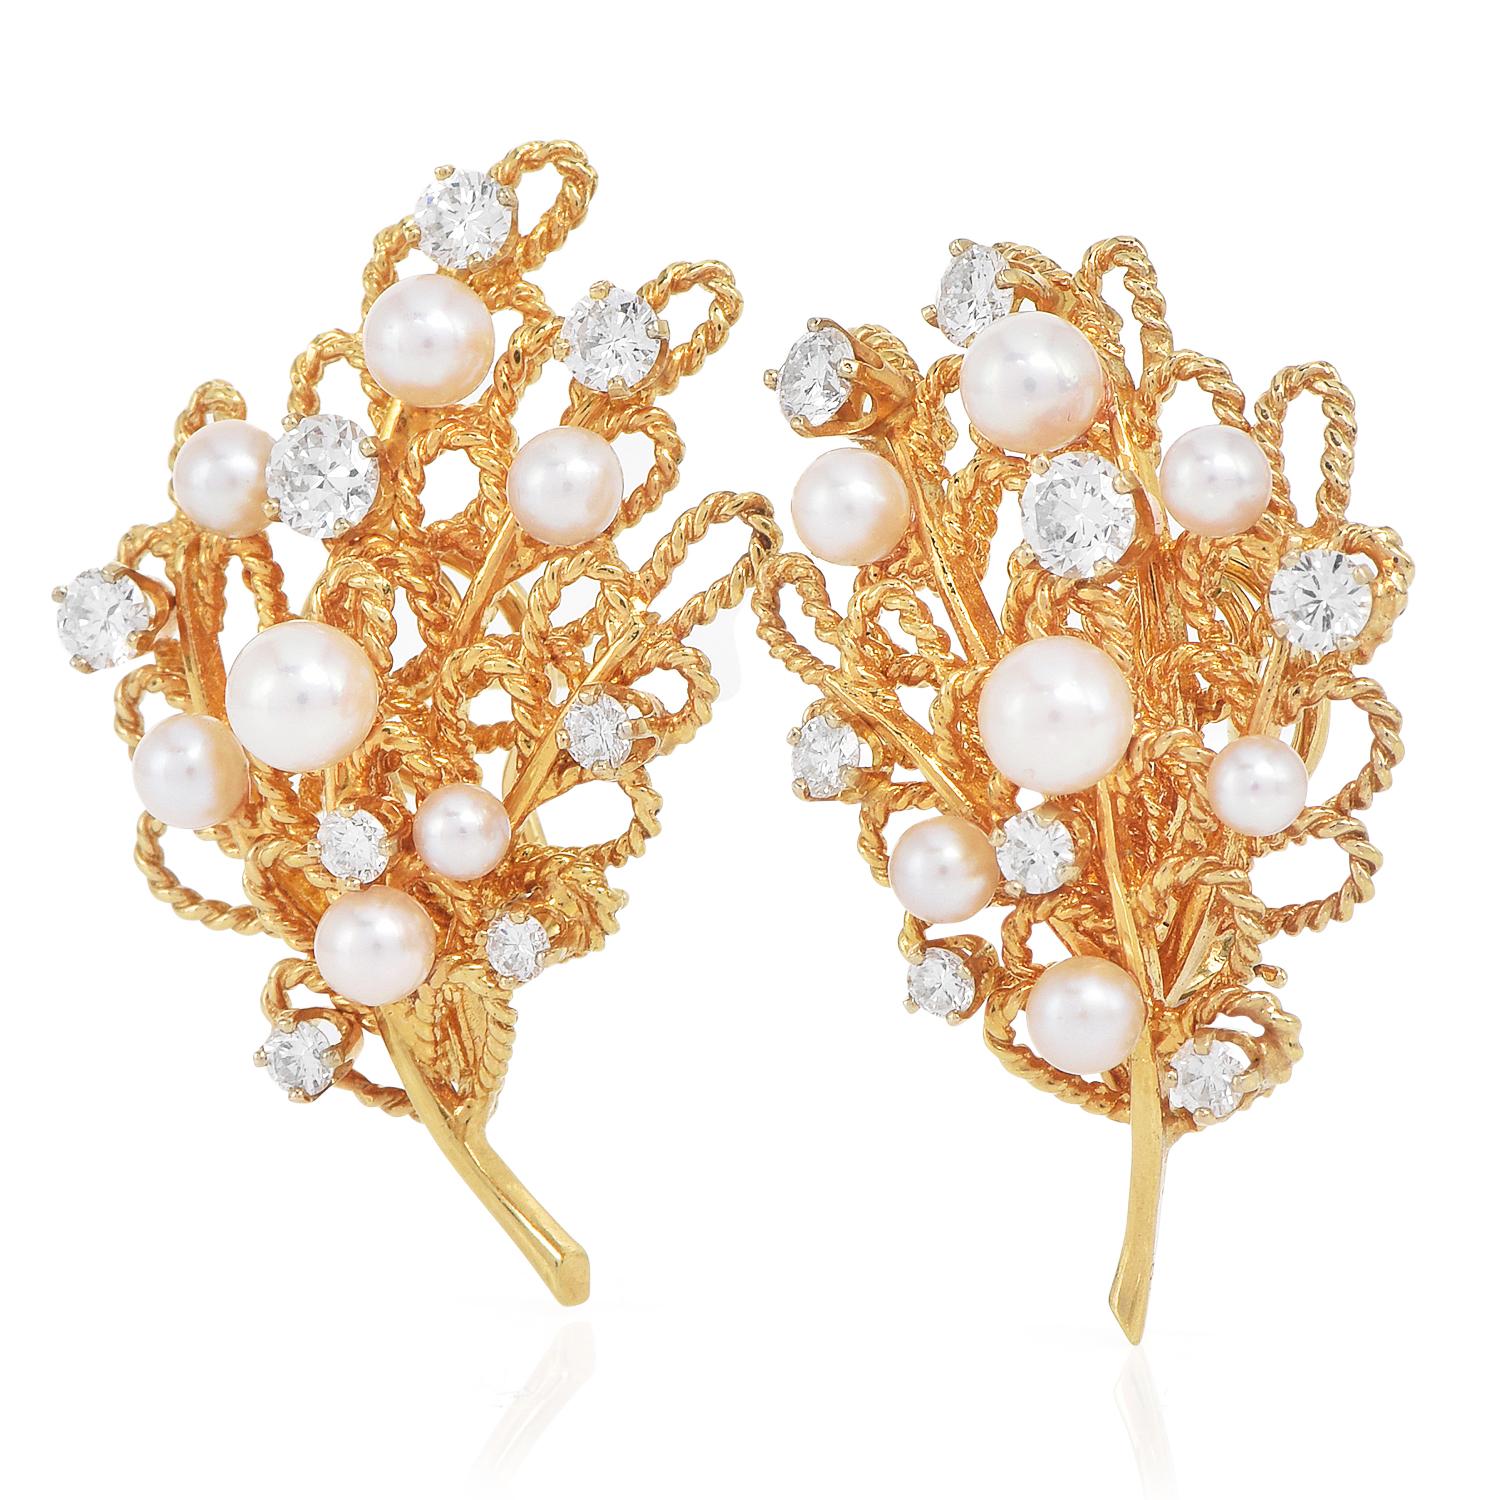 Vinatge Akoya Pearl Diamond 22K Gold Rope Flower Bouquet Earrings In Excellent Condition For Sale In Miami, FL